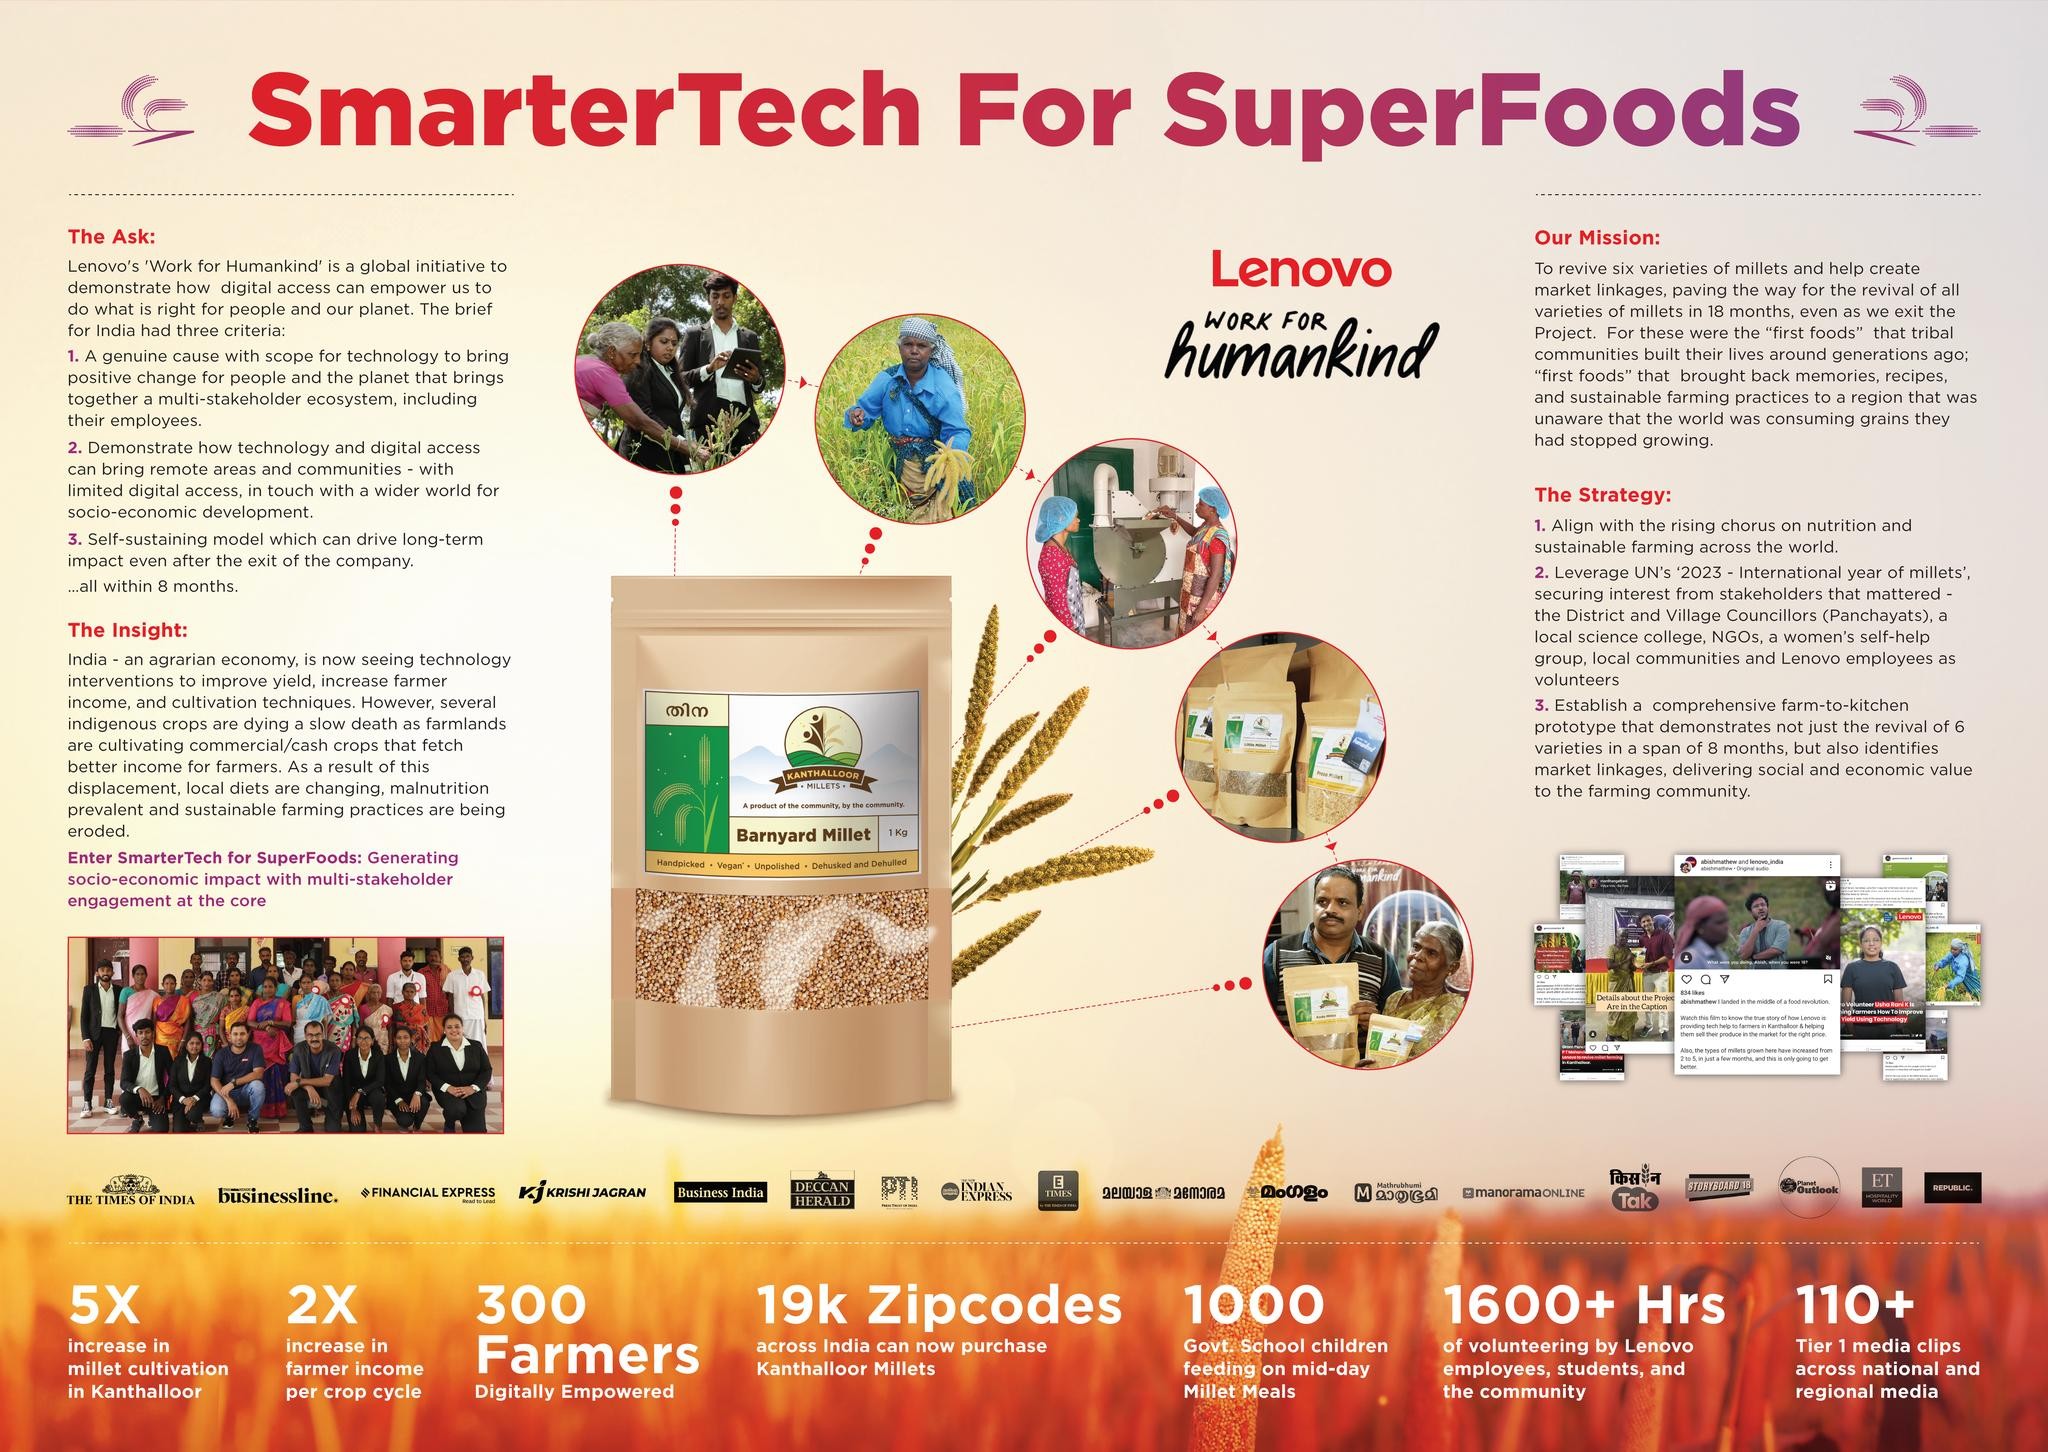 SmarterTech for SuperFoods - Lenovo Work For Humankind Campaign